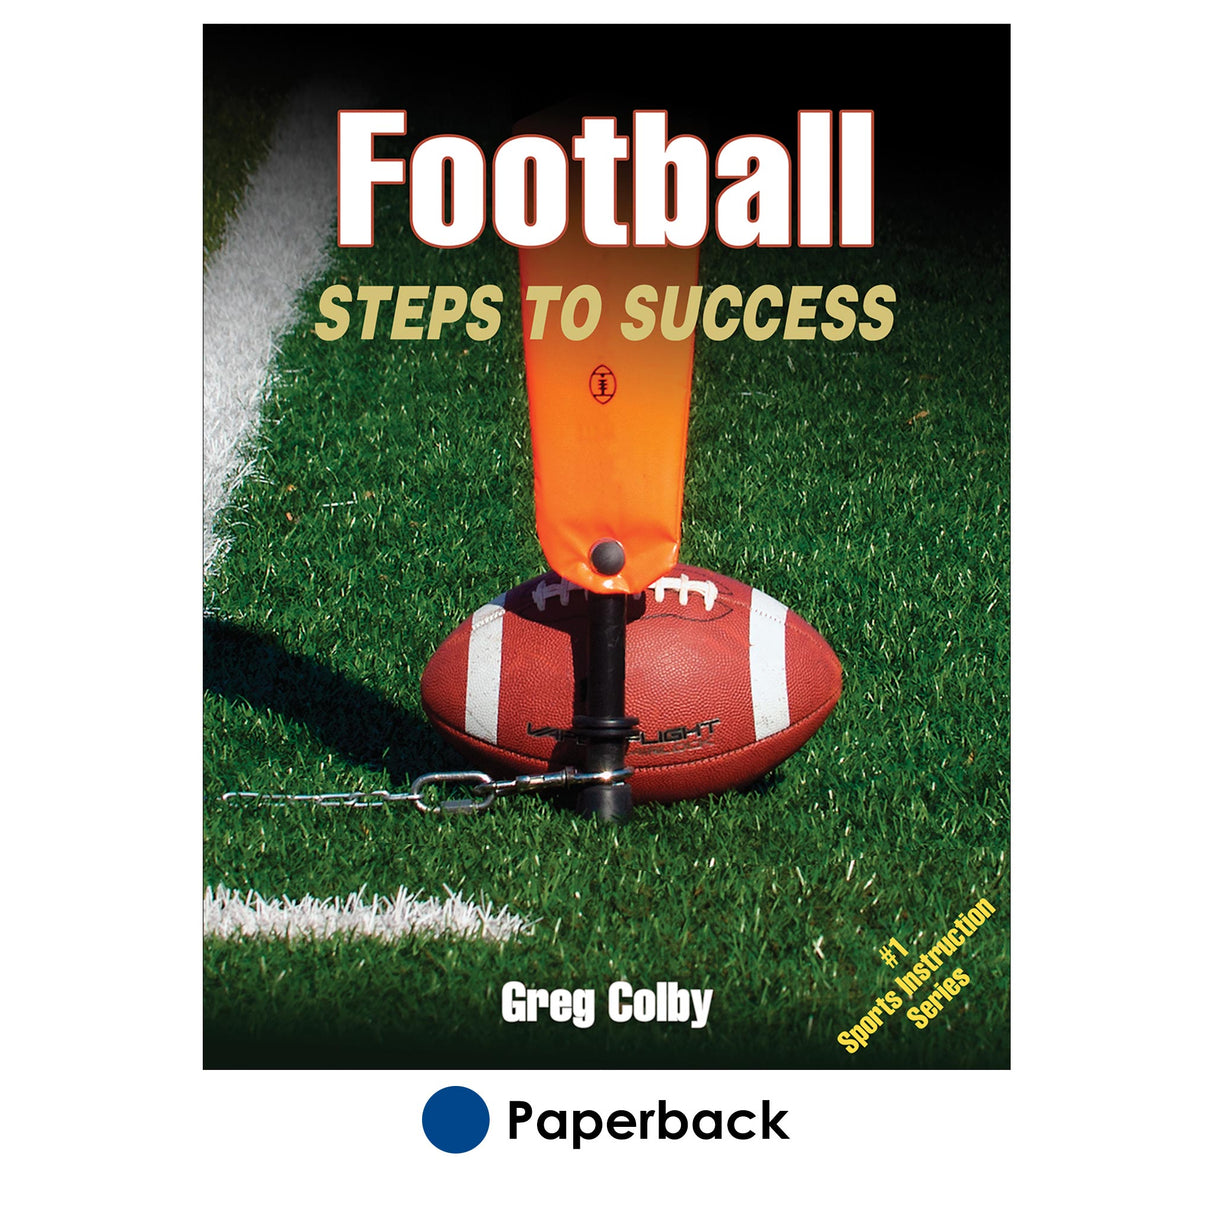 Football: Steps to Success